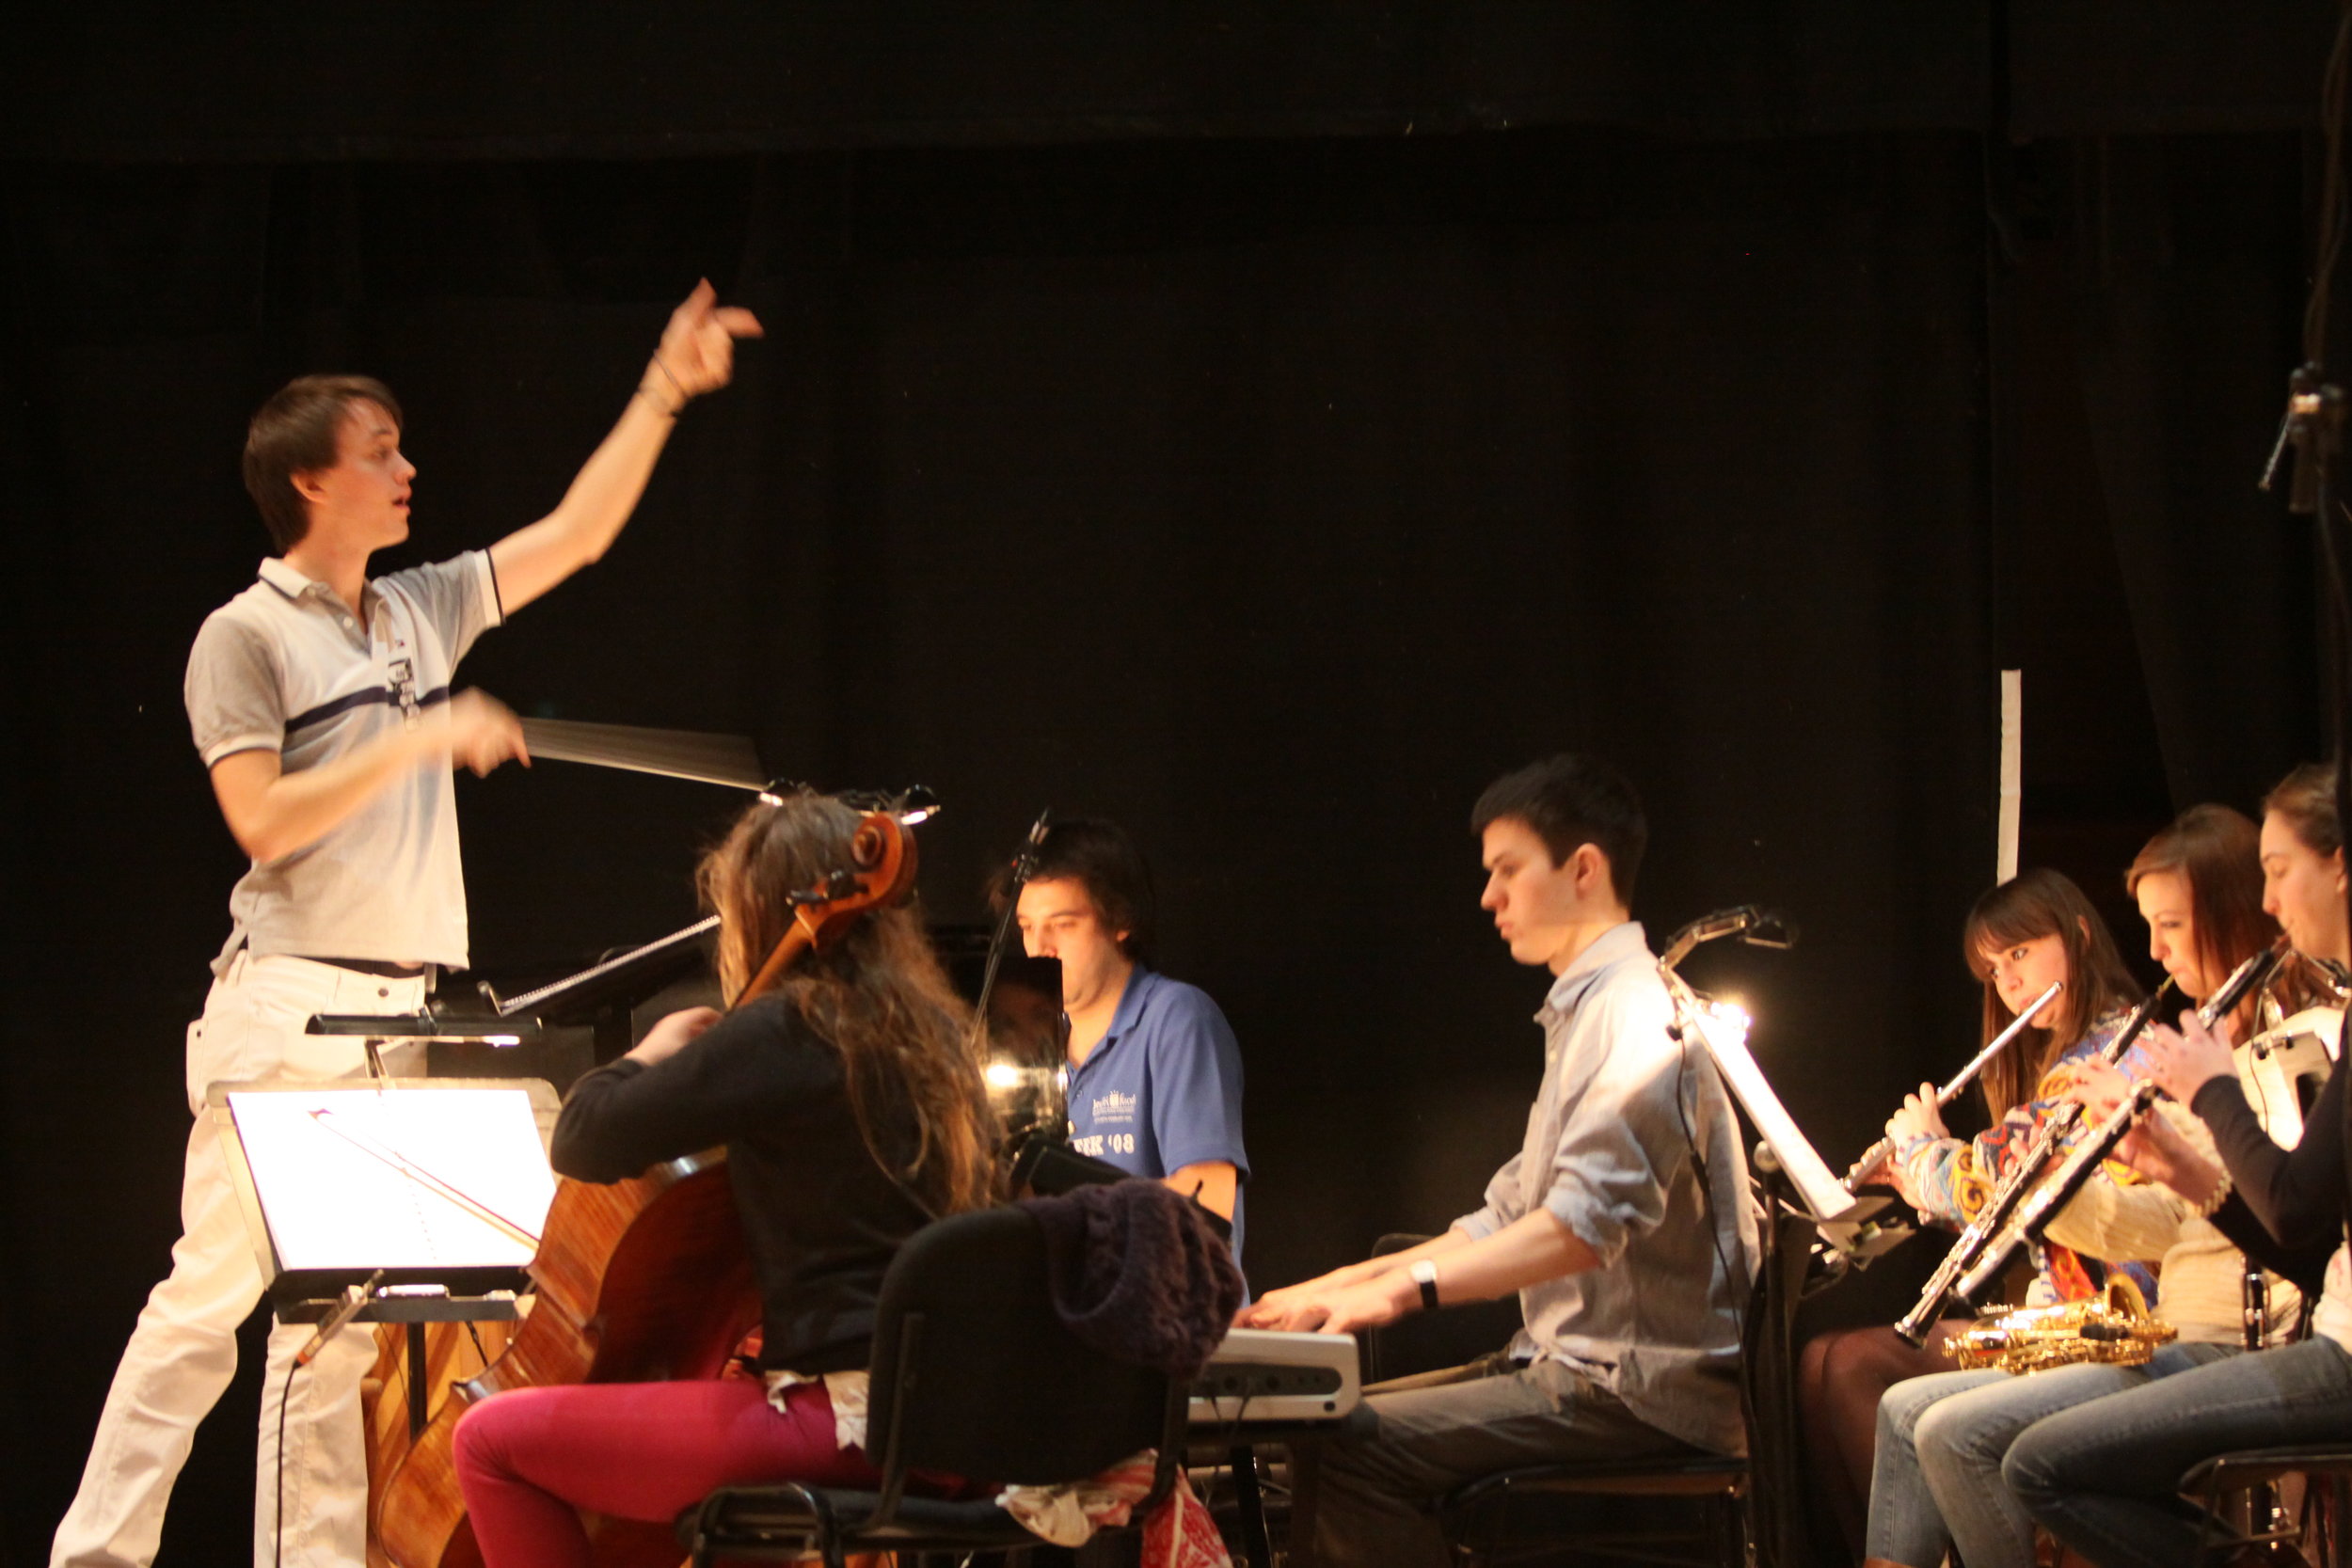 Jude conducting The Forbidden Fruit orchestra, Brighton Festival, Brighton Dome, composed by Jude Obermüller (photo by Sarah Sutherland-Rowe)